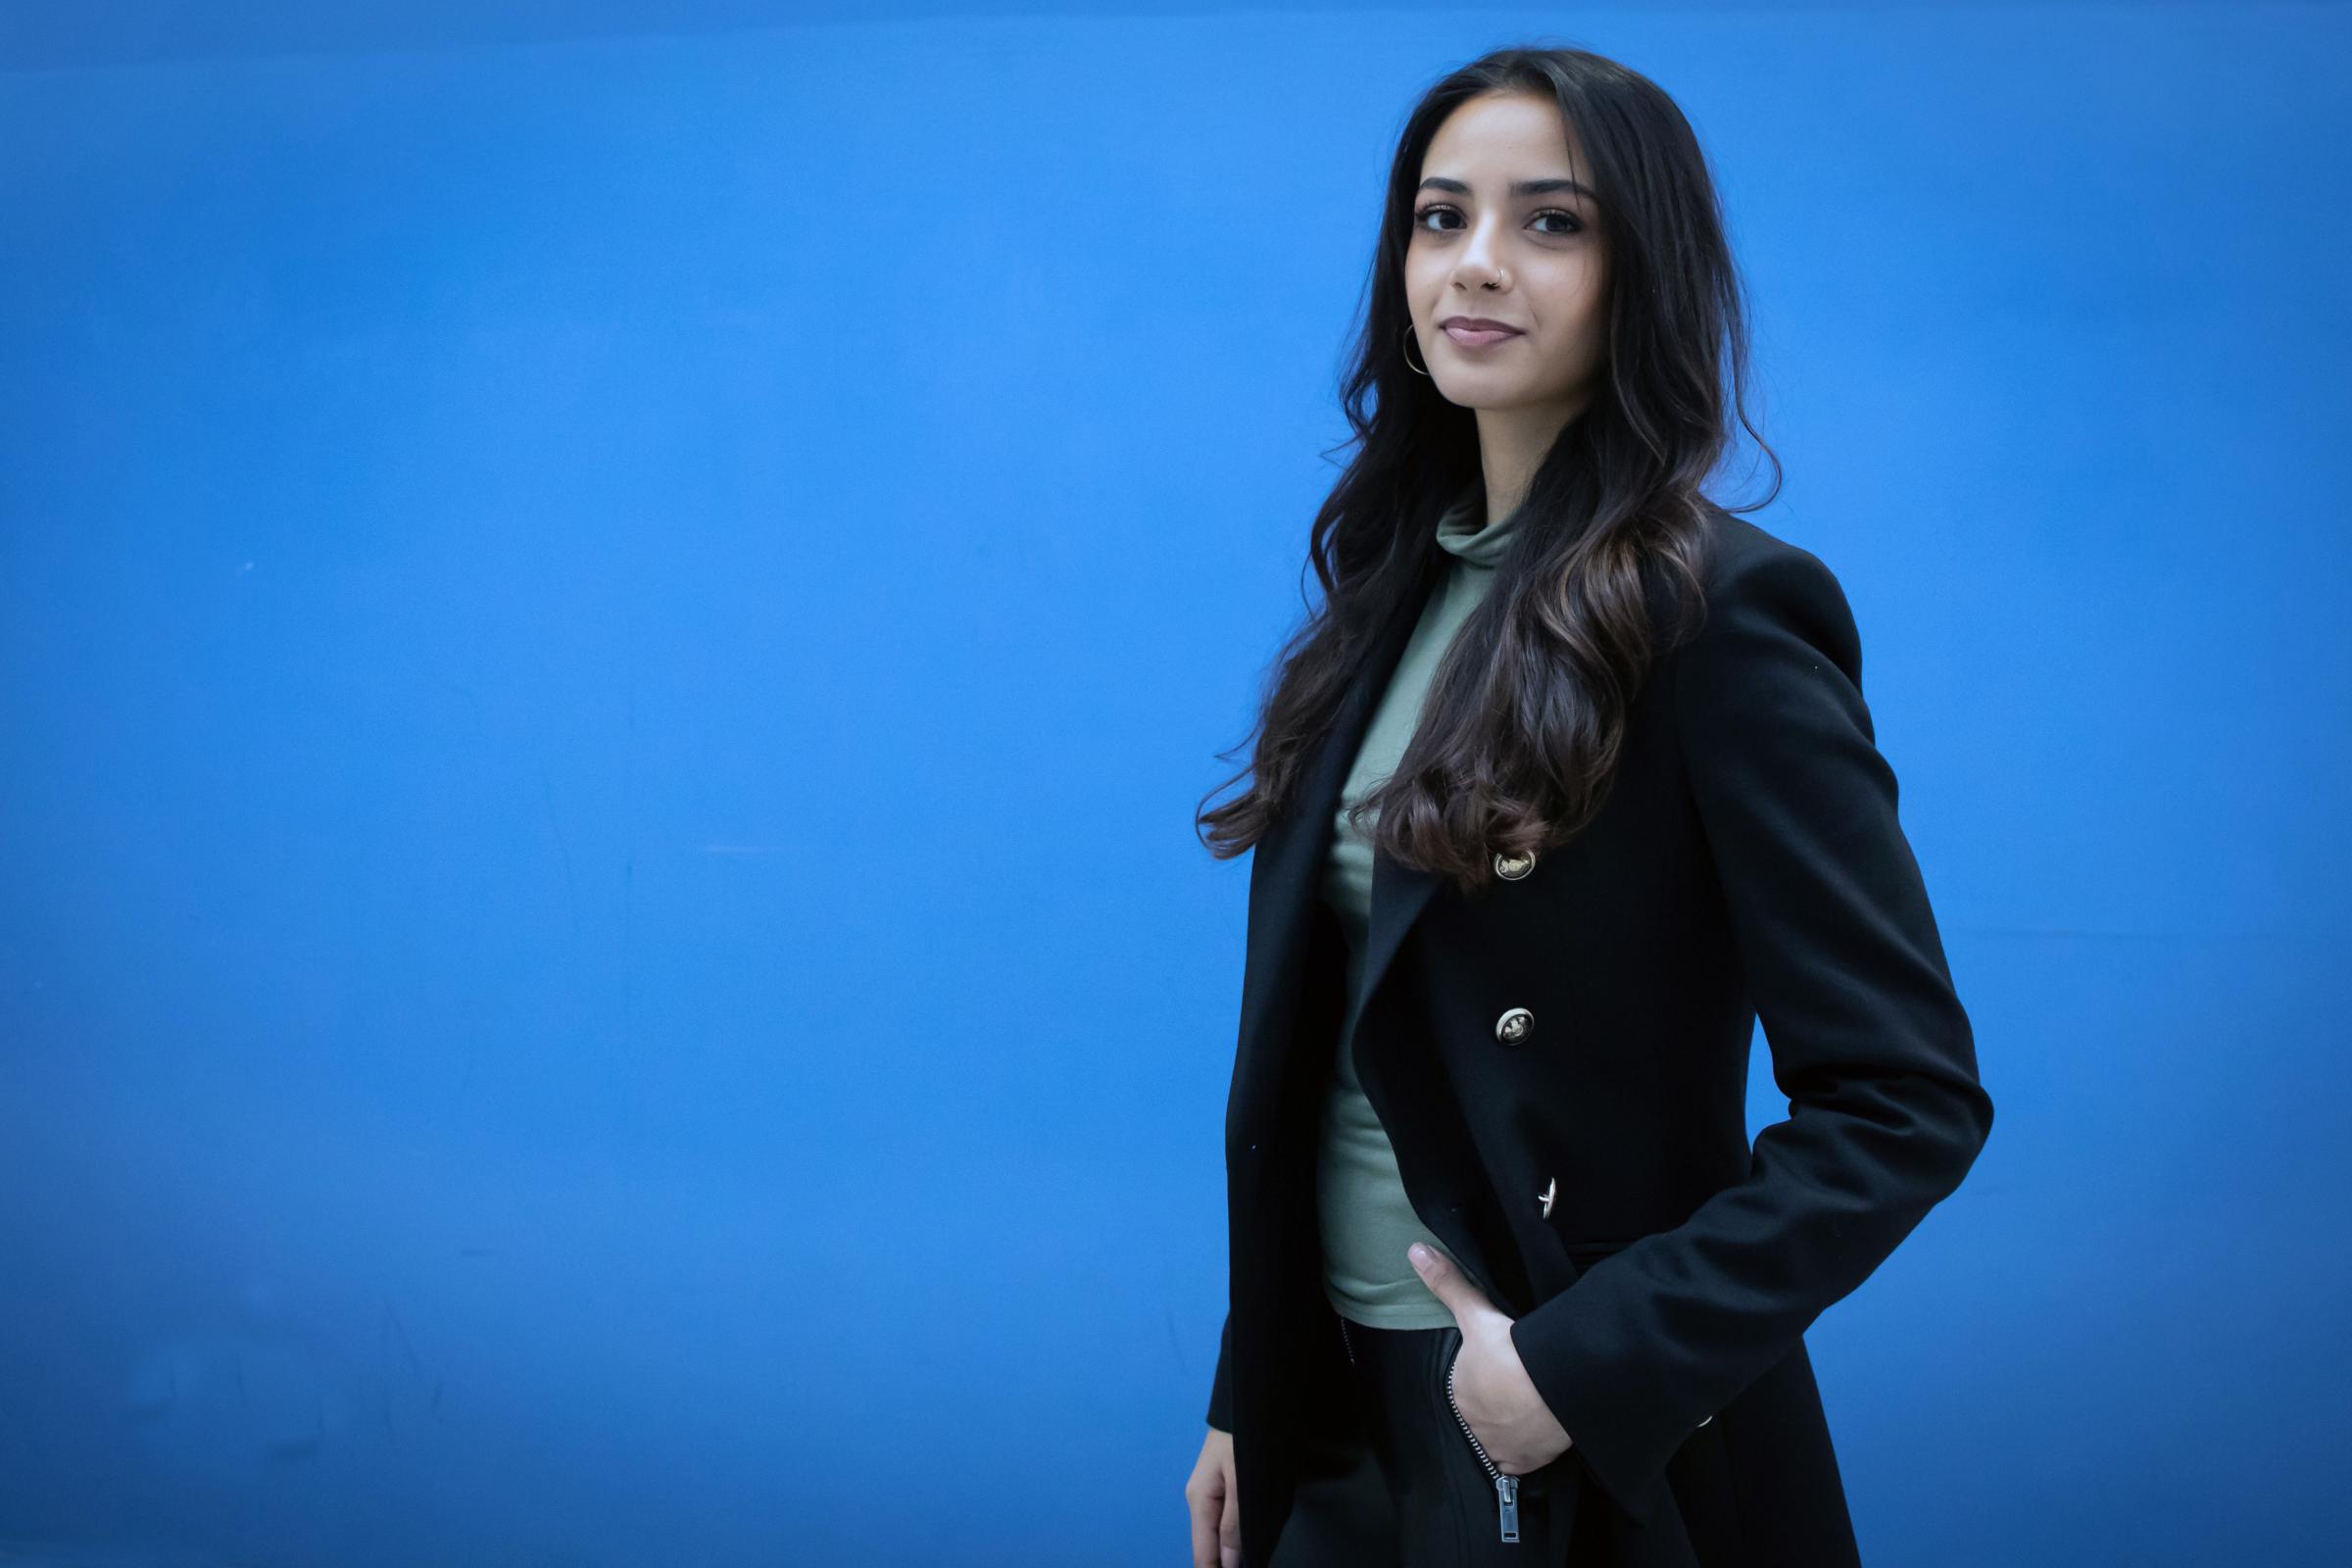 Former Kelvinside Academy pupil Maliha Shoaib wins competition designed to bring more diverse perspectives into journalism.